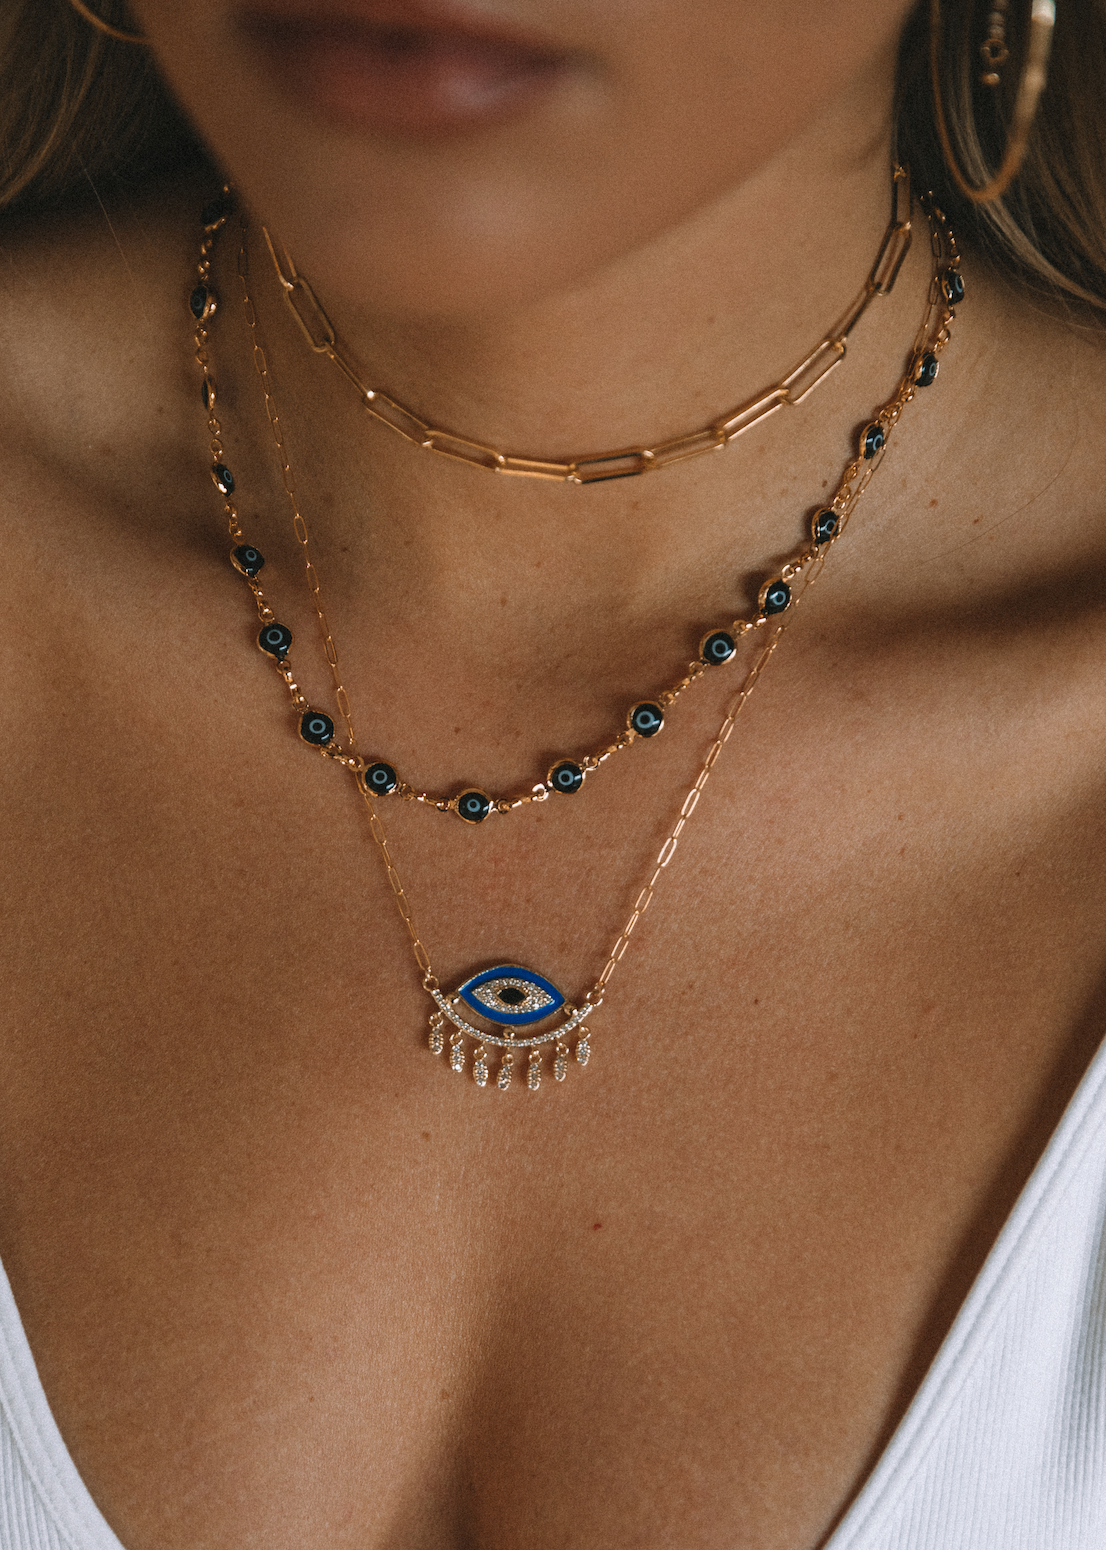 The Eyes On You Necklace